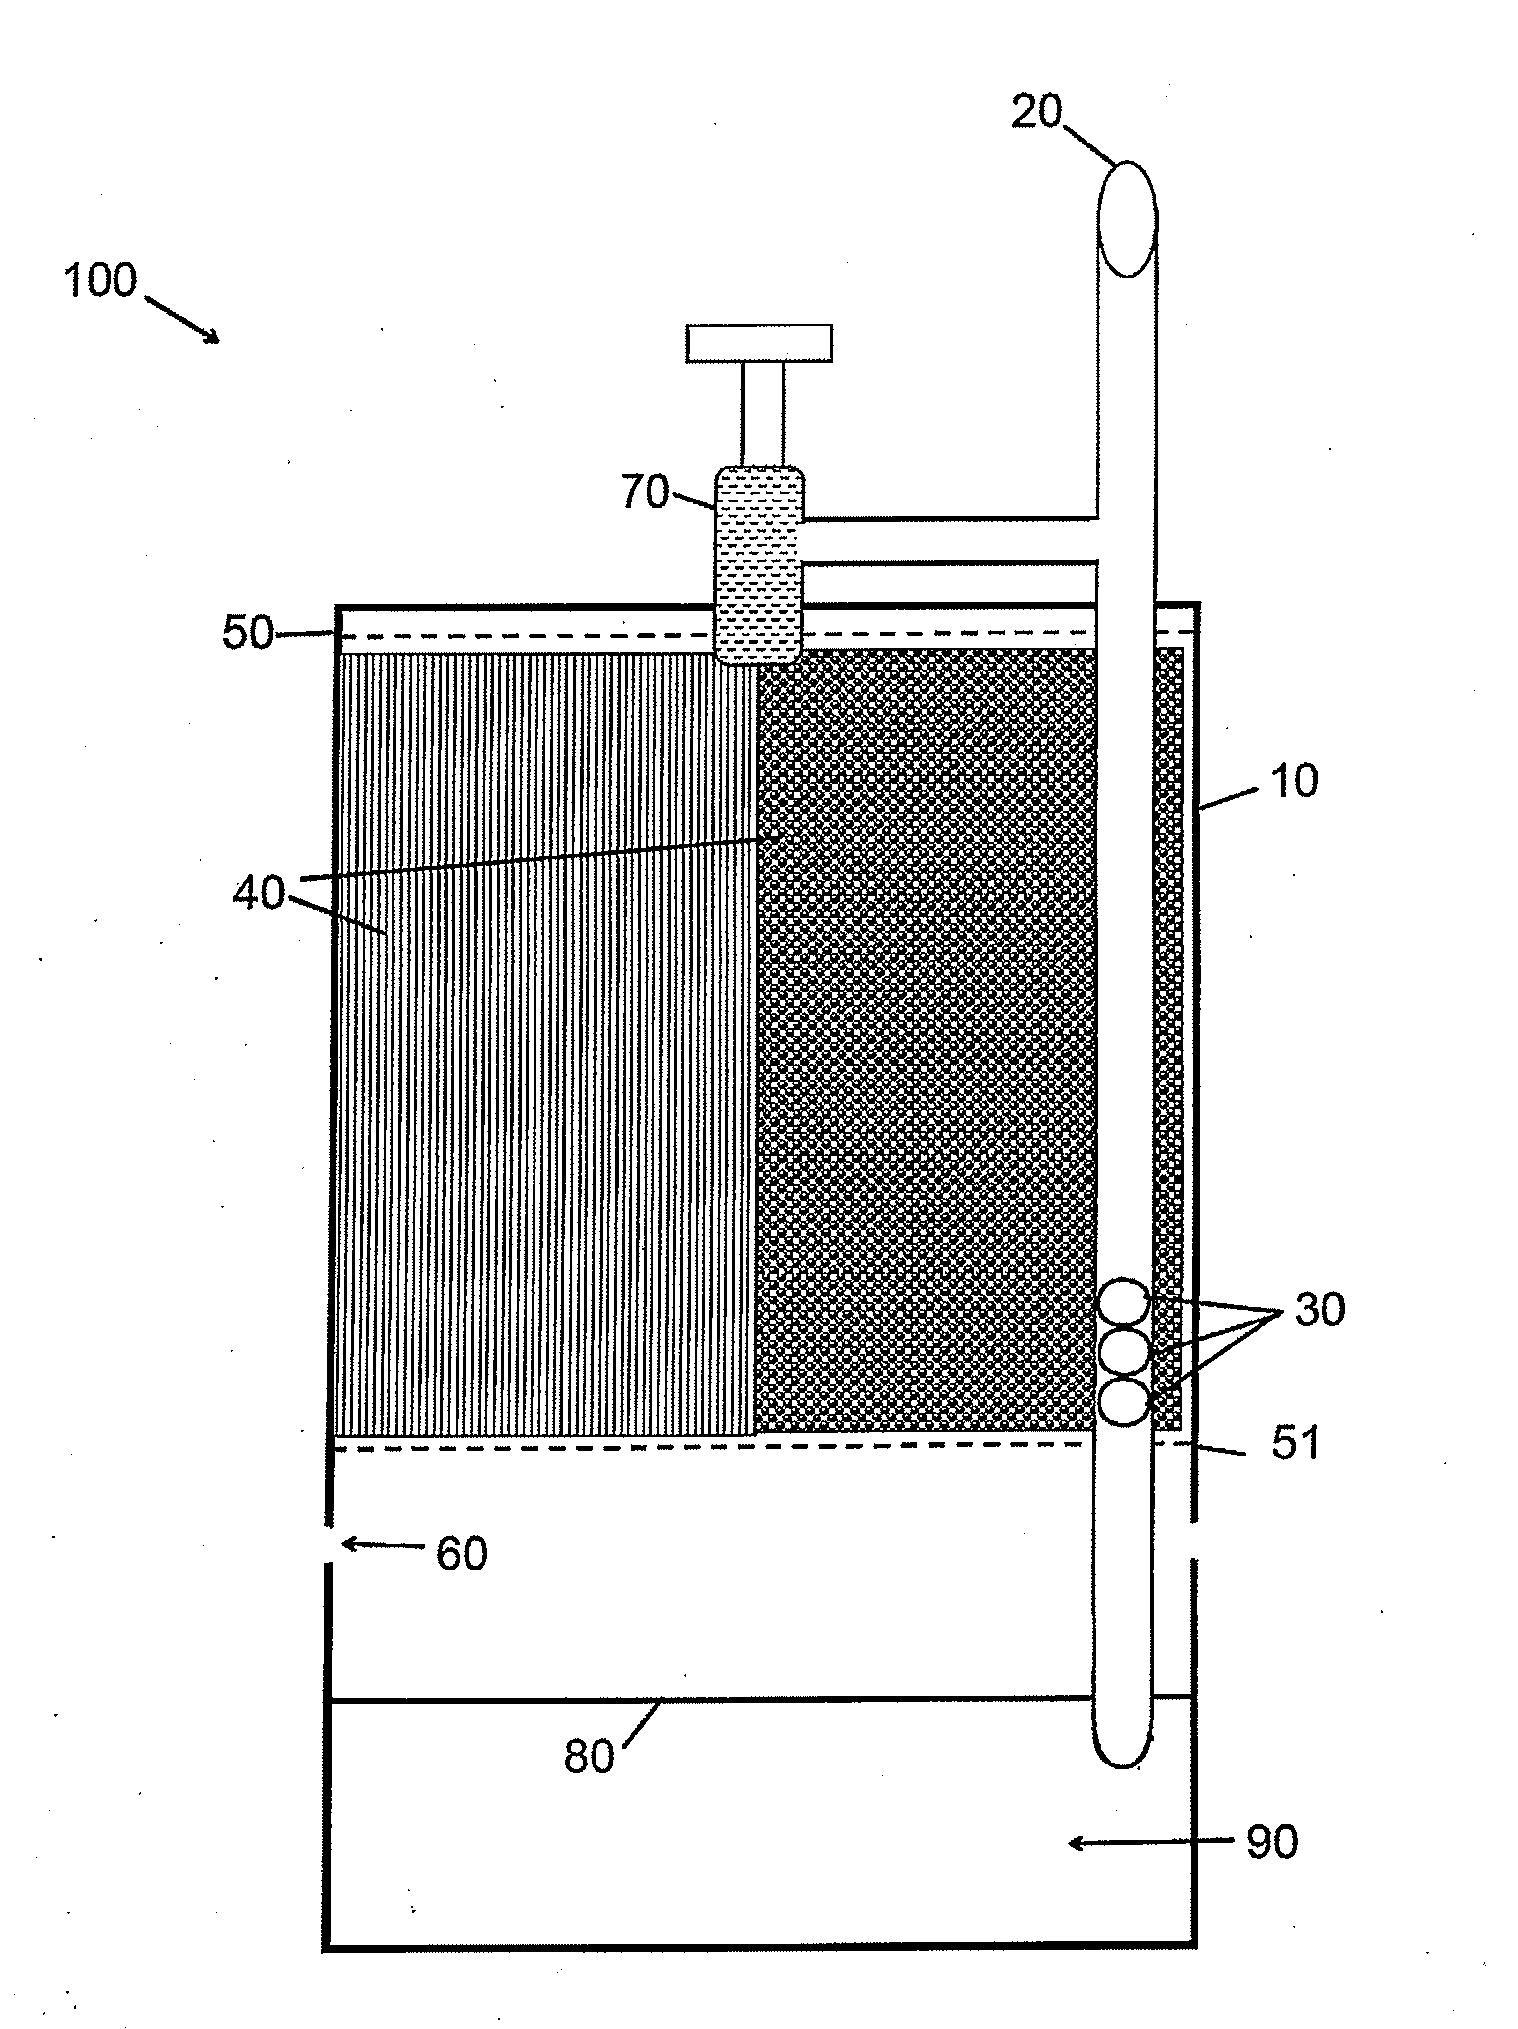 Method of growing bacteria for use in wastewater treatment